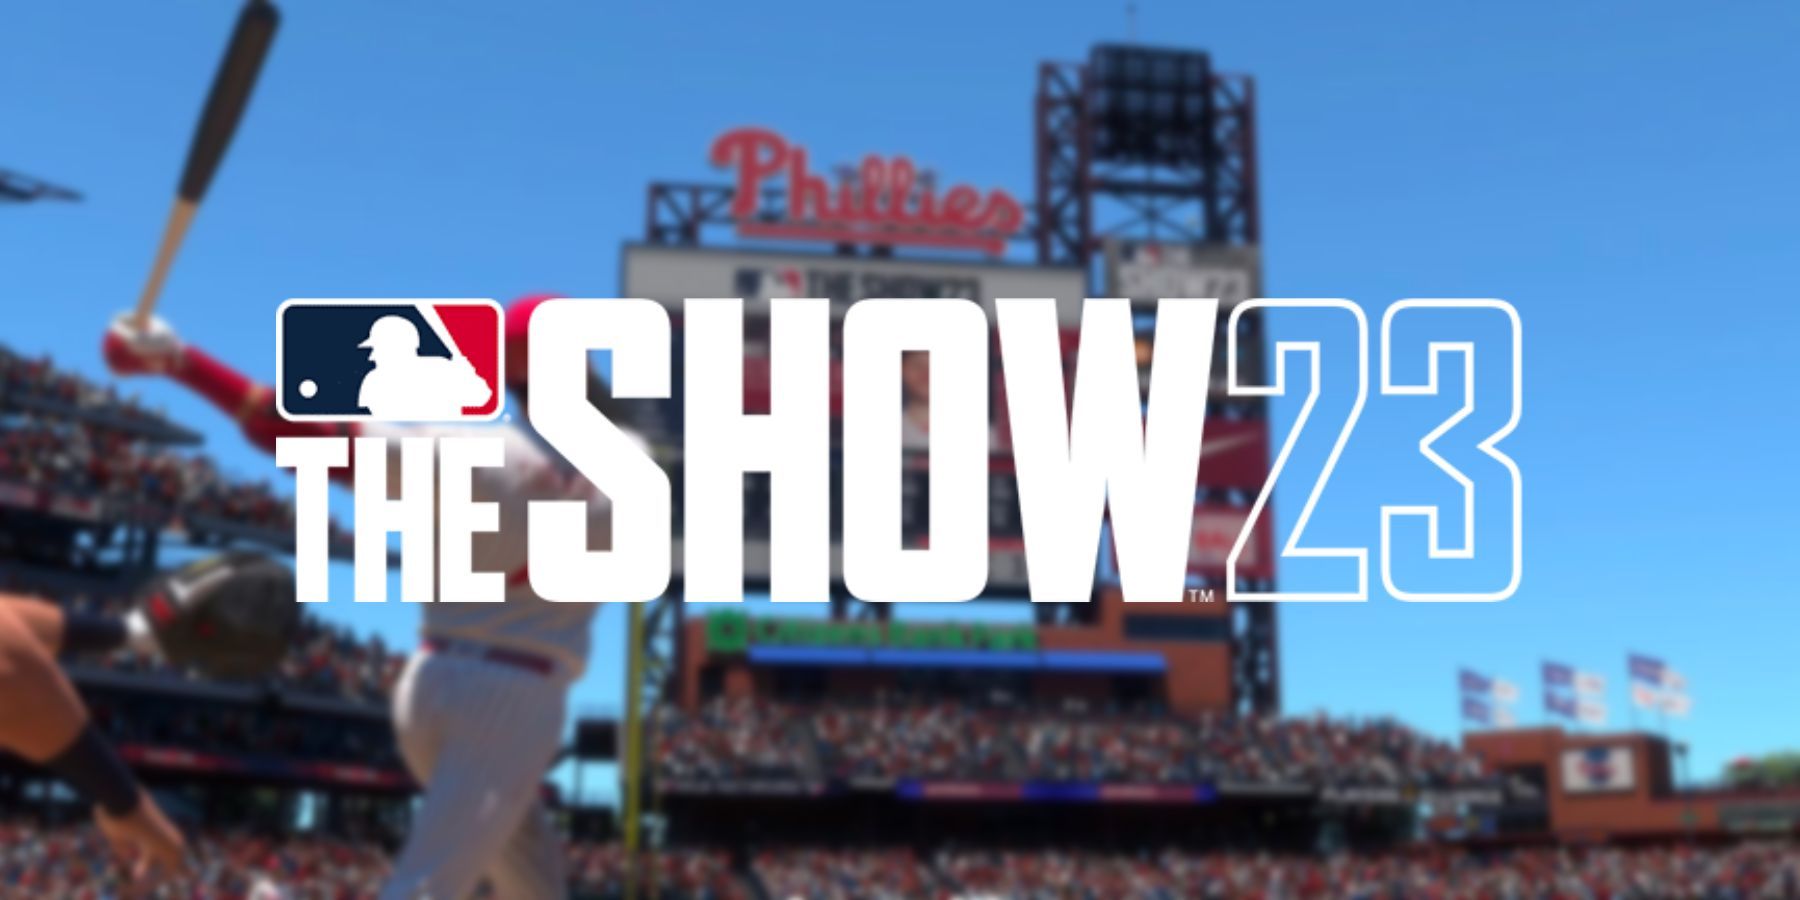 MLB The Show 23 Updates: Are Mark McGwire and Sammy Sosa coming to